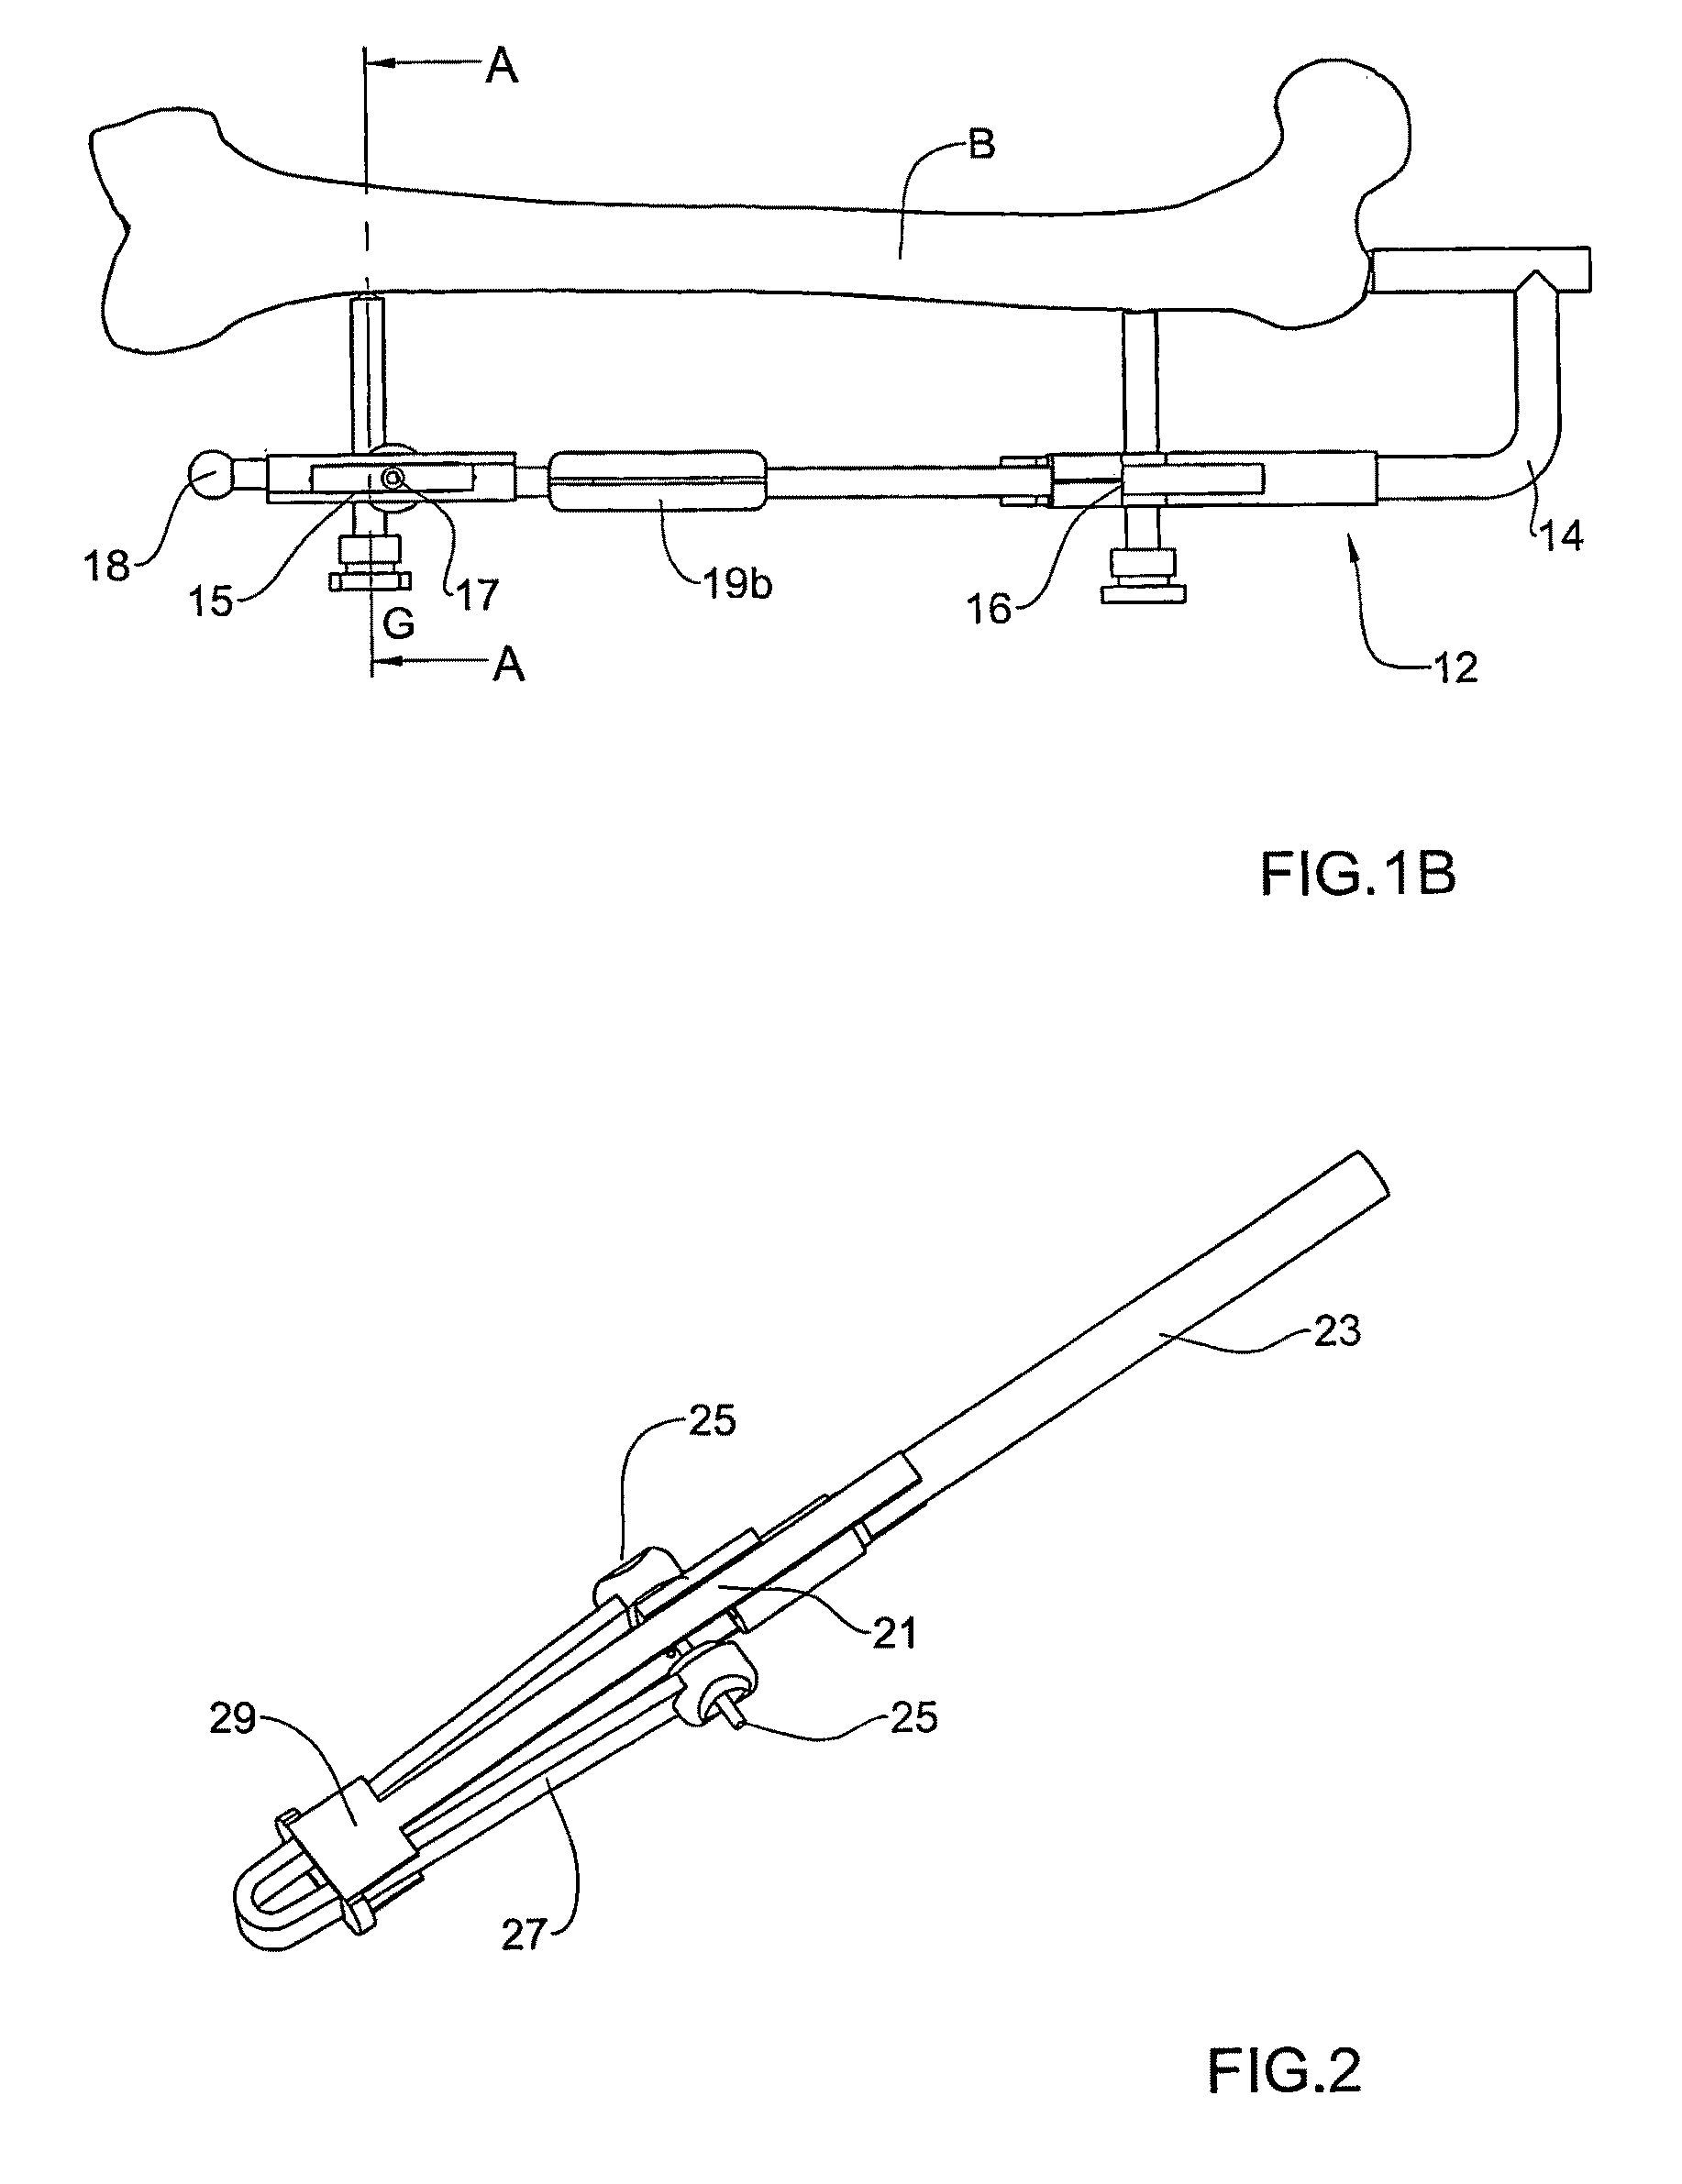 System and method for locating of distal holes of an intramedullary nail